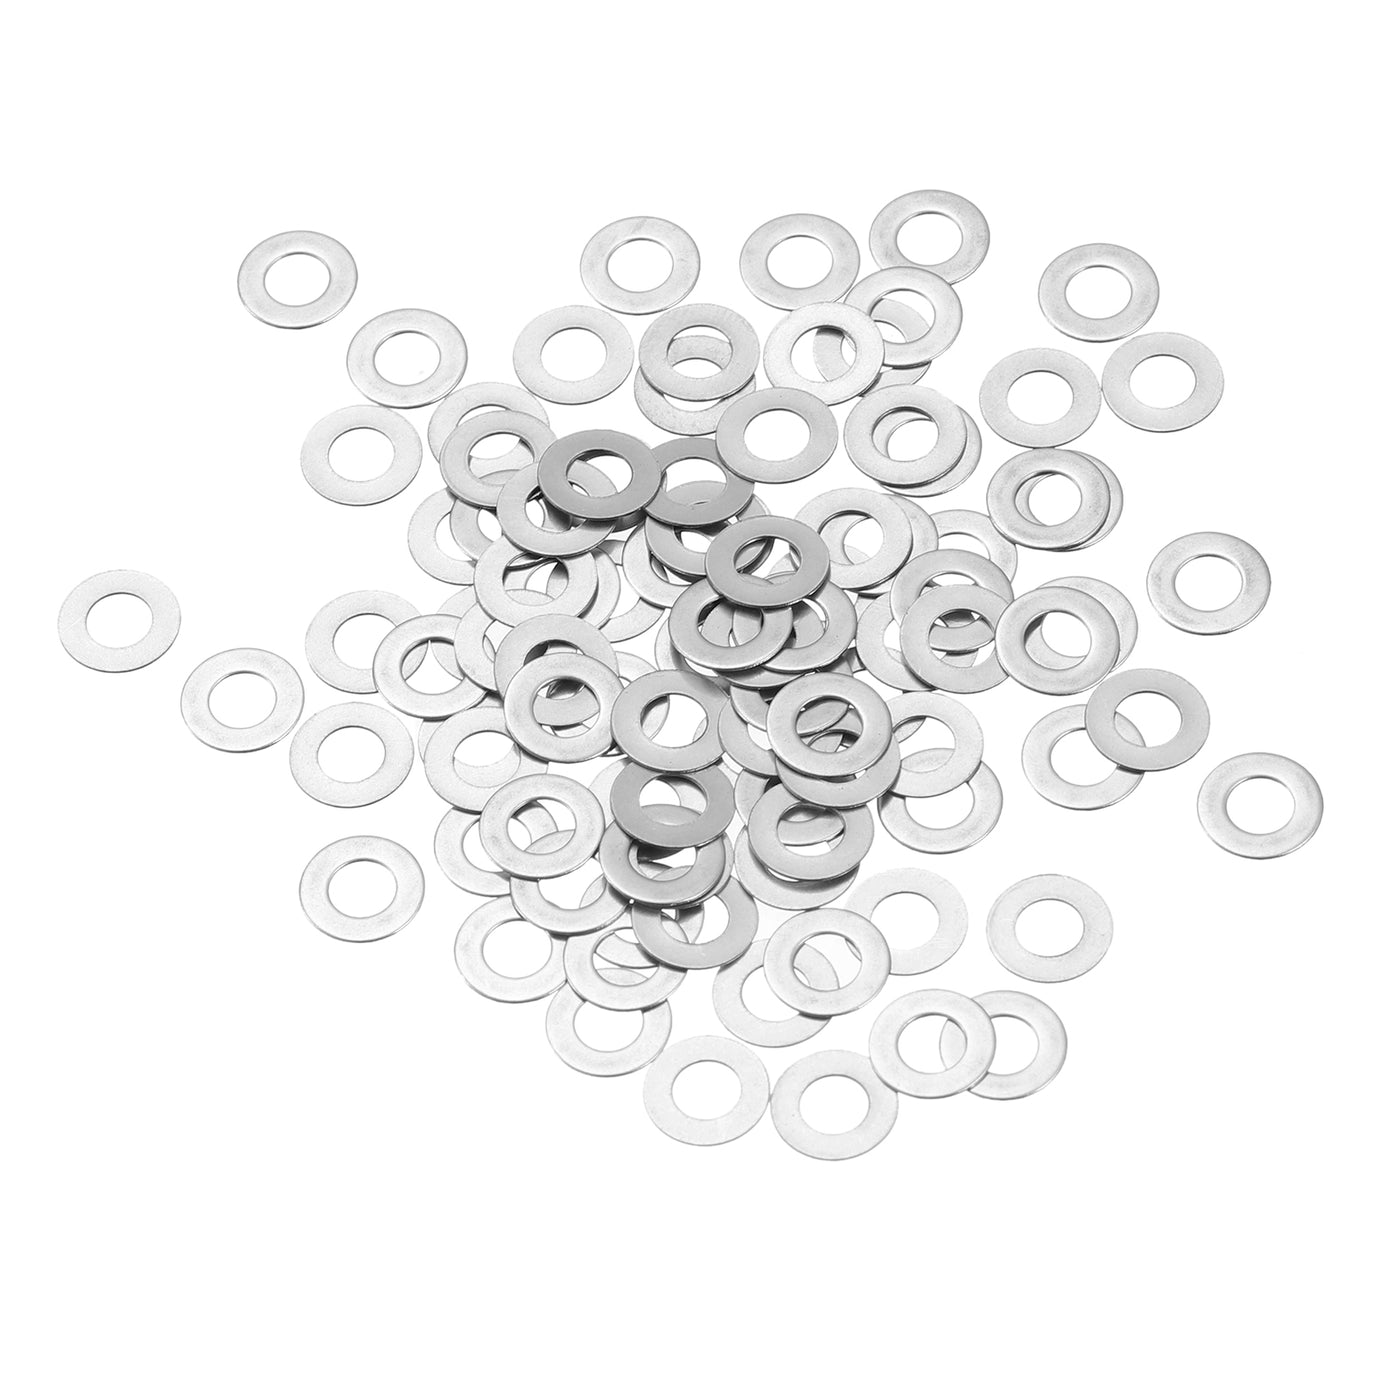 uxcell Uxcell M4 304 Stainless Steel Flat Washers, 100pcs 4x8x0.3mm Ultra Thin Flat Spacers